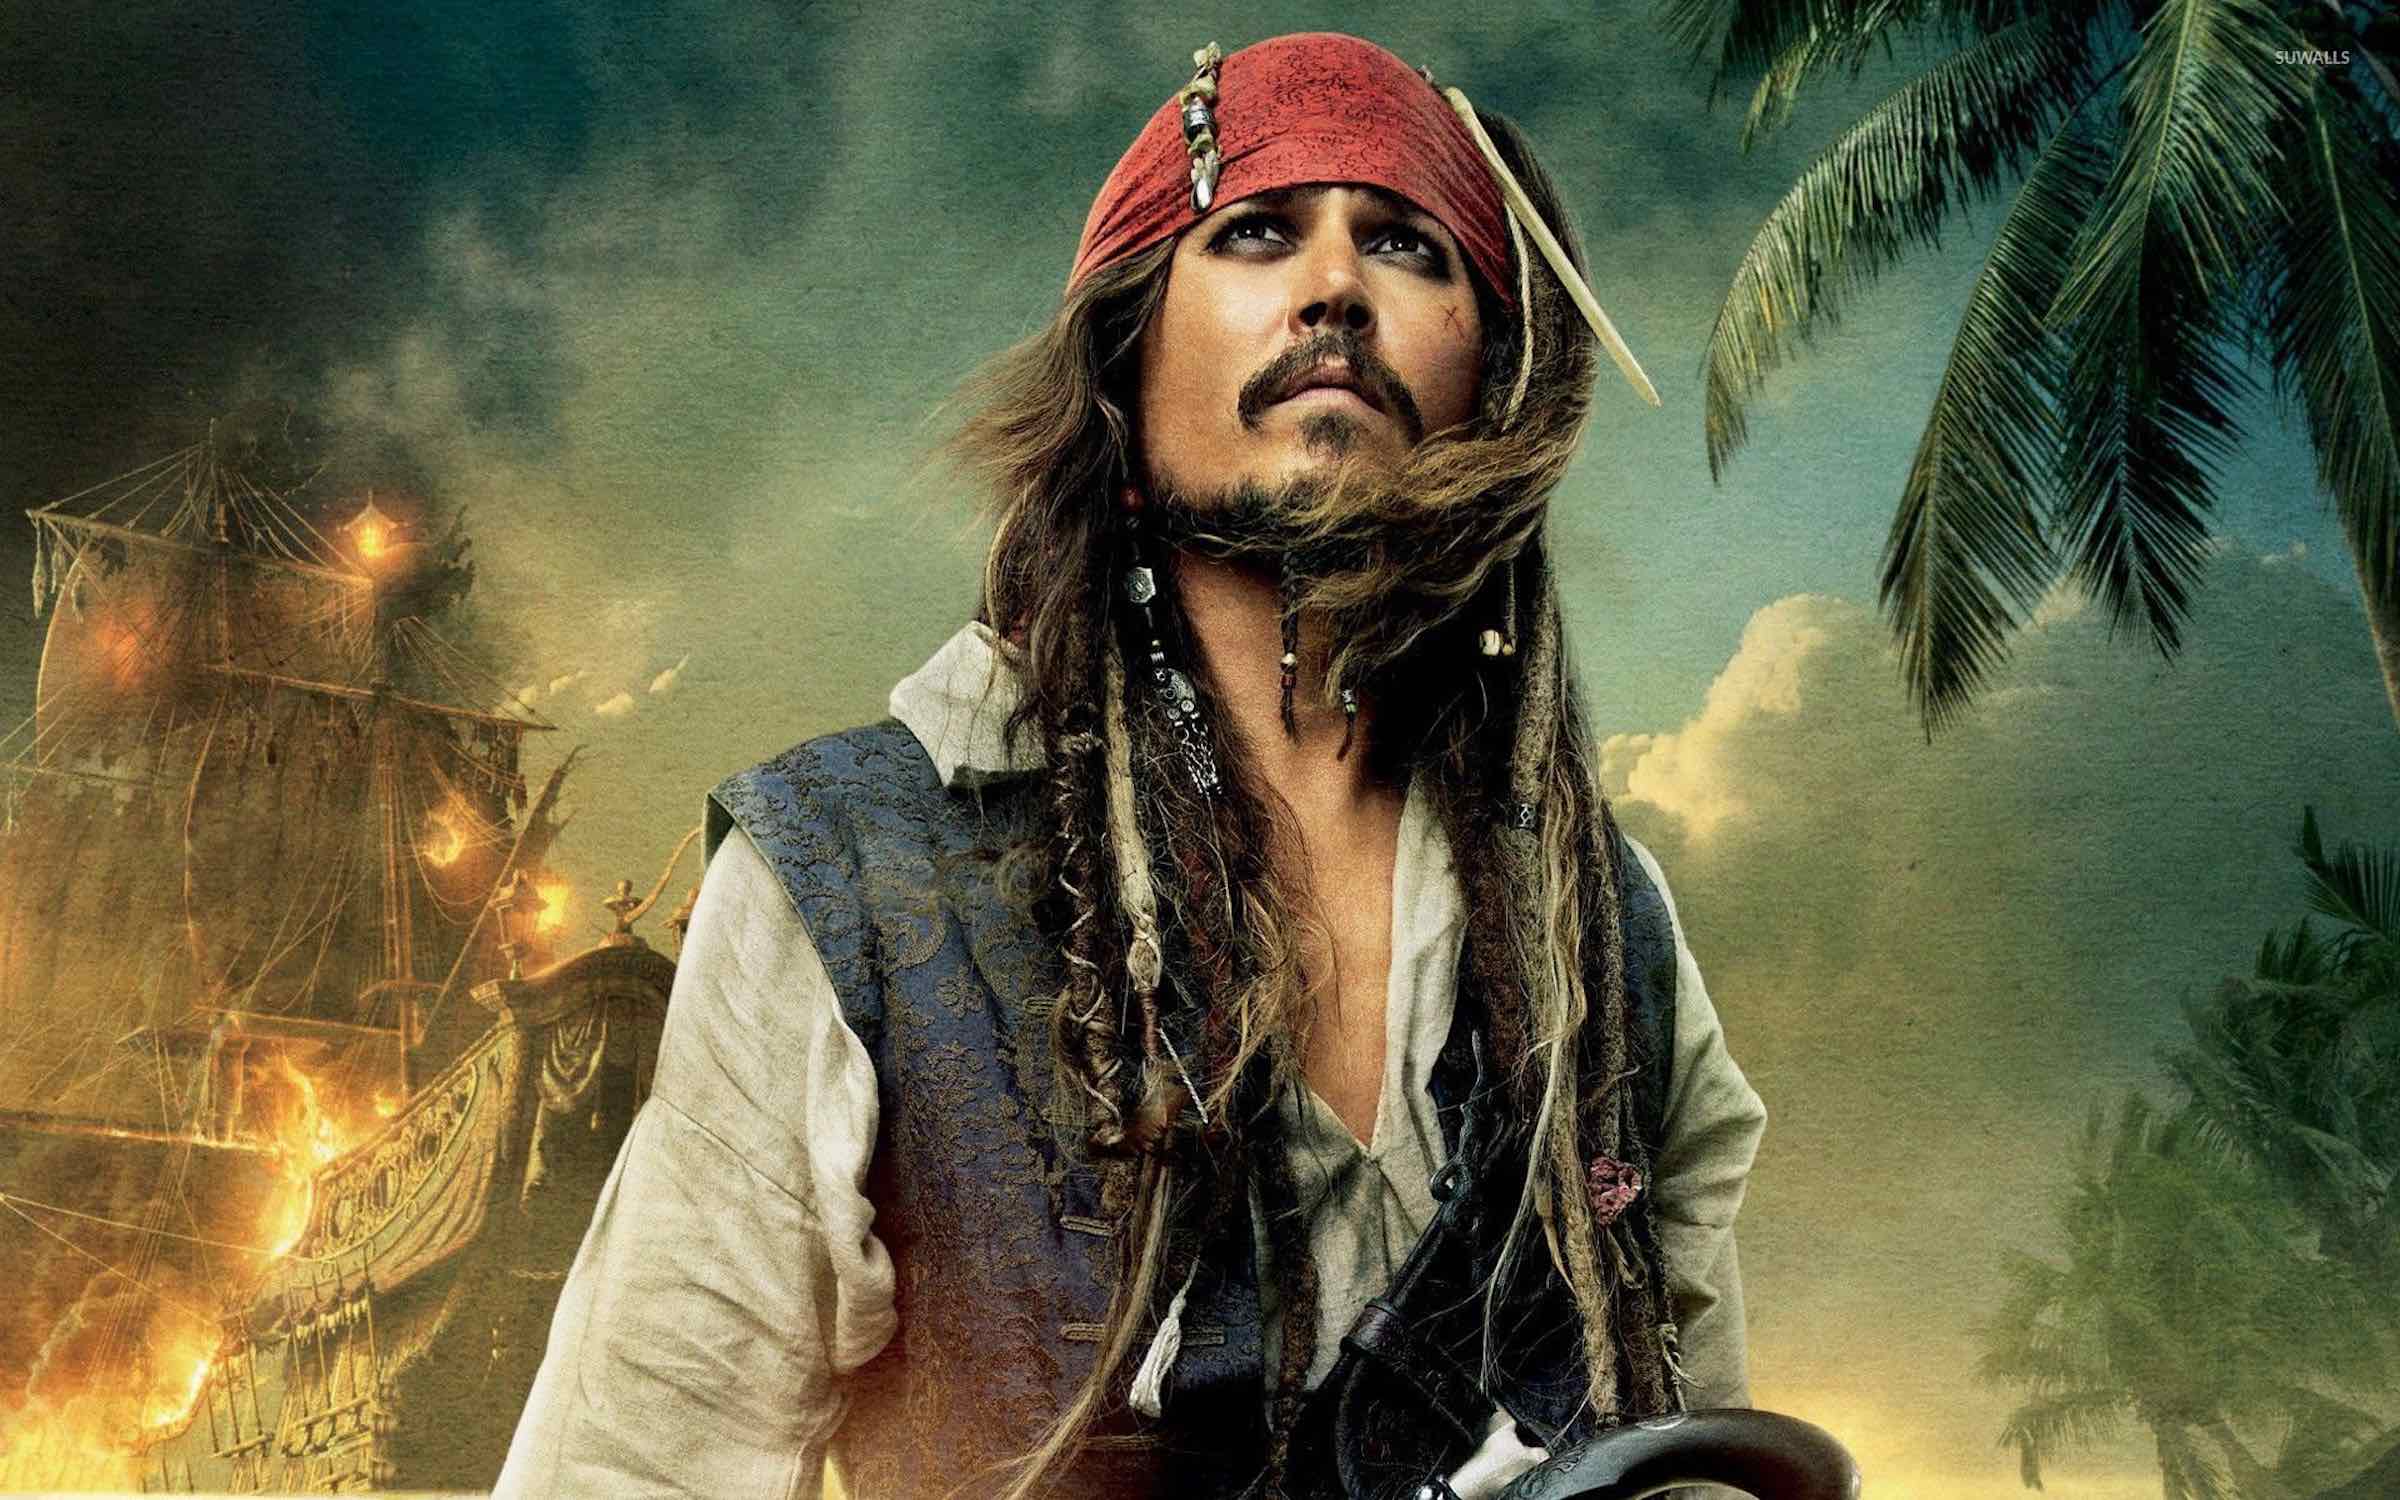 Should Johnny Depp really return to the ‘Pirates of the Caribbean’?